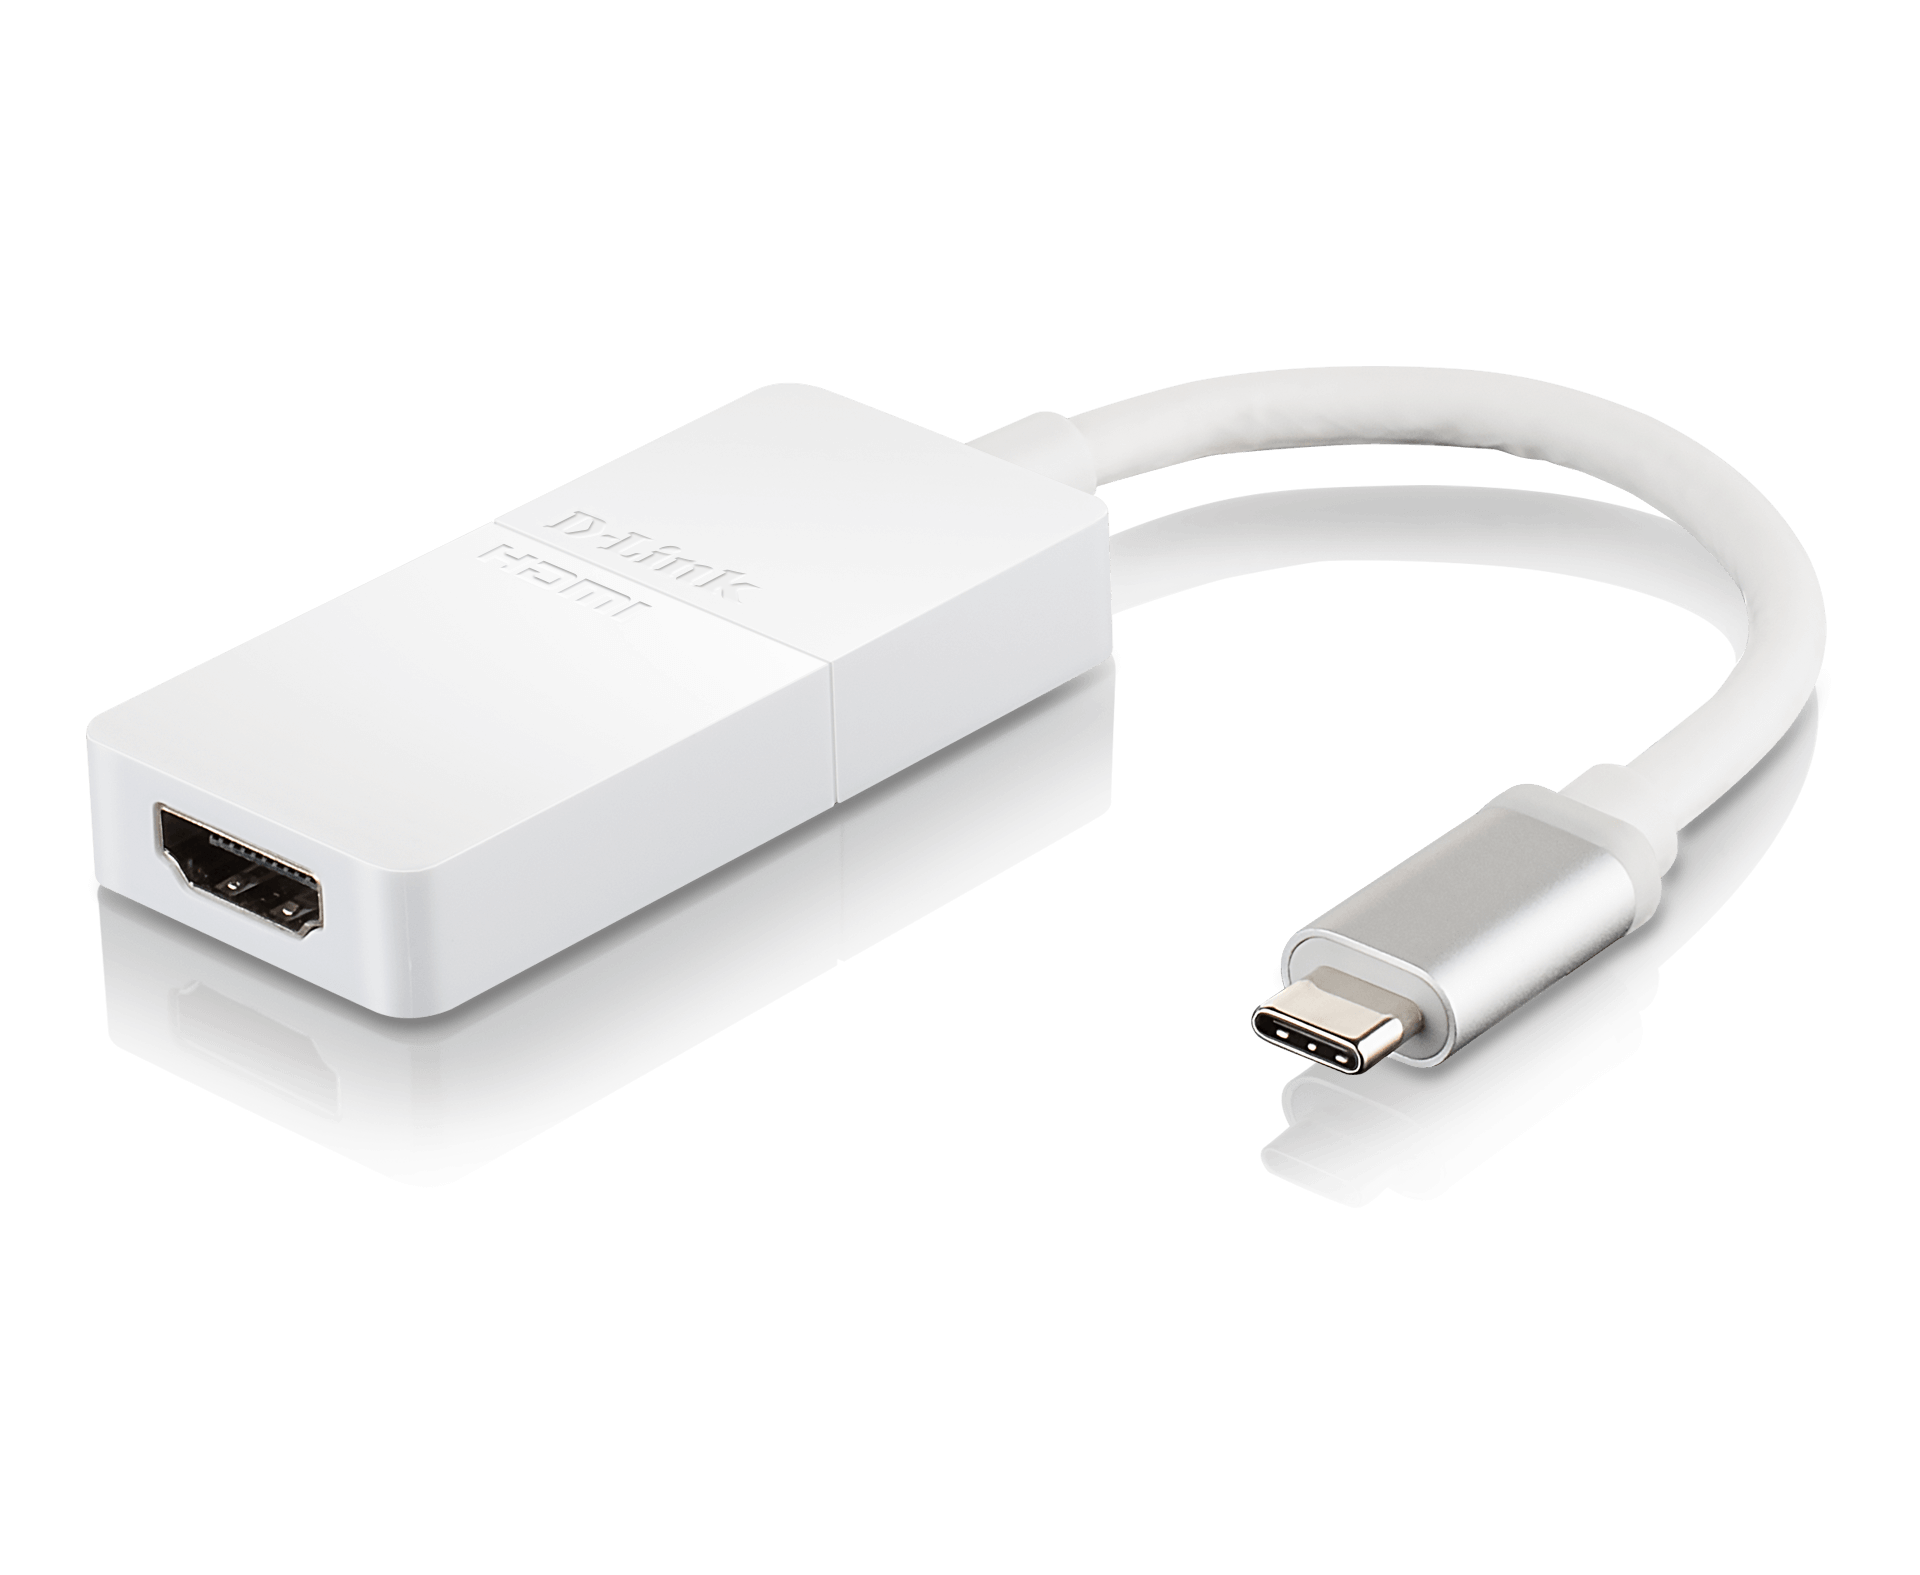 How to use USB-C to HDMI Cable